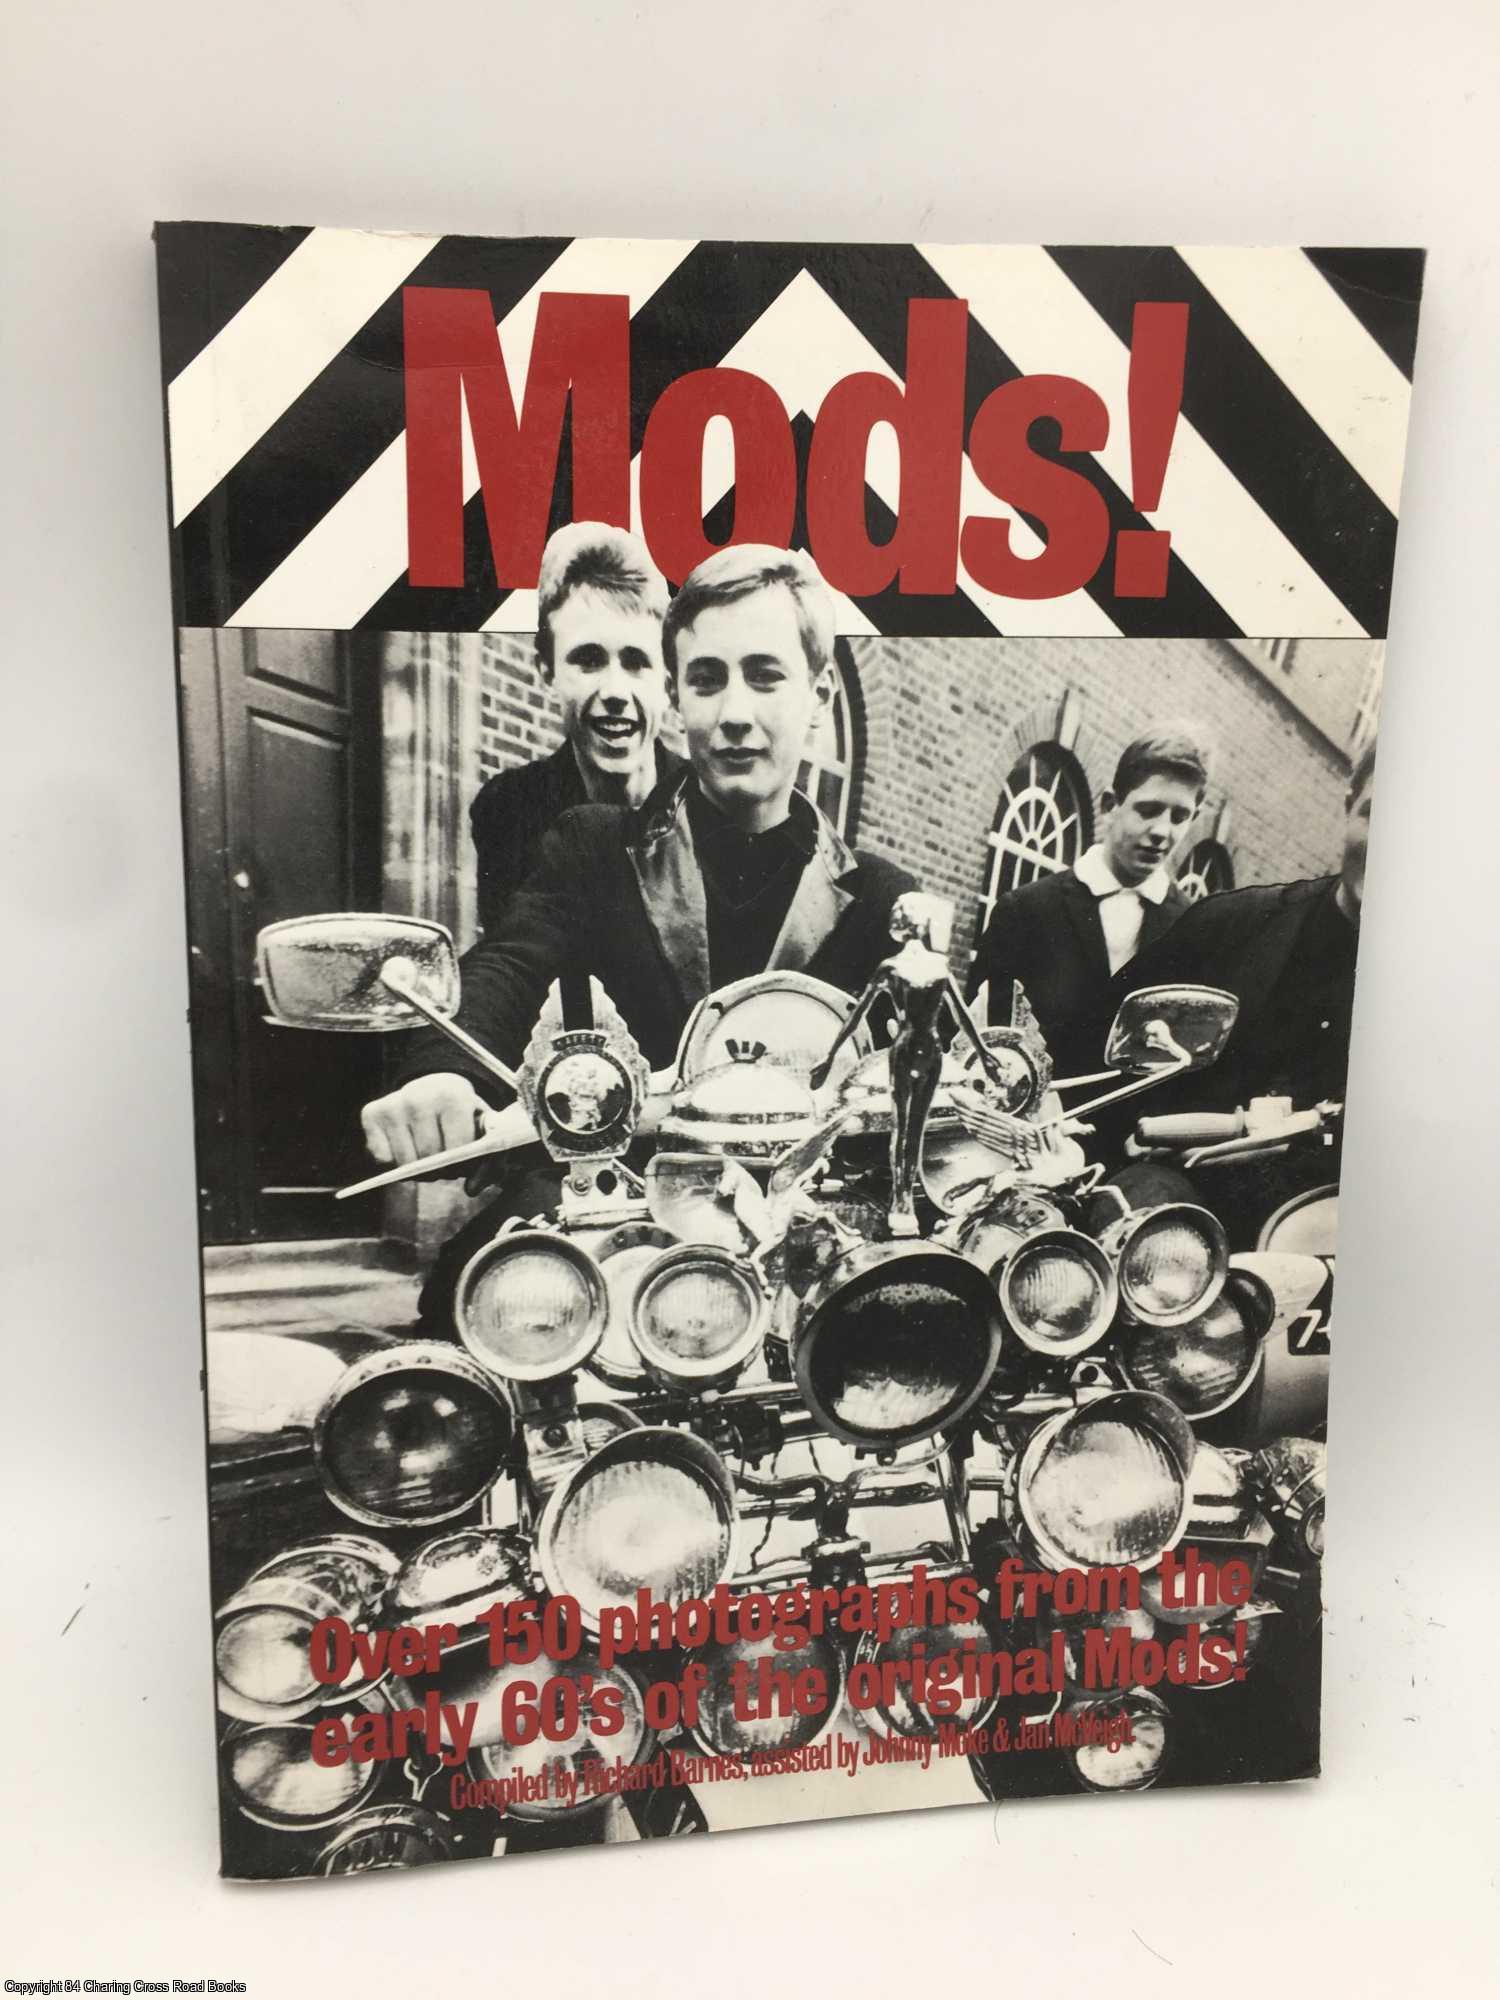 Barnes, Richard - Mods!: Over 150 Photographs from the Early '60's of the Original Mods!